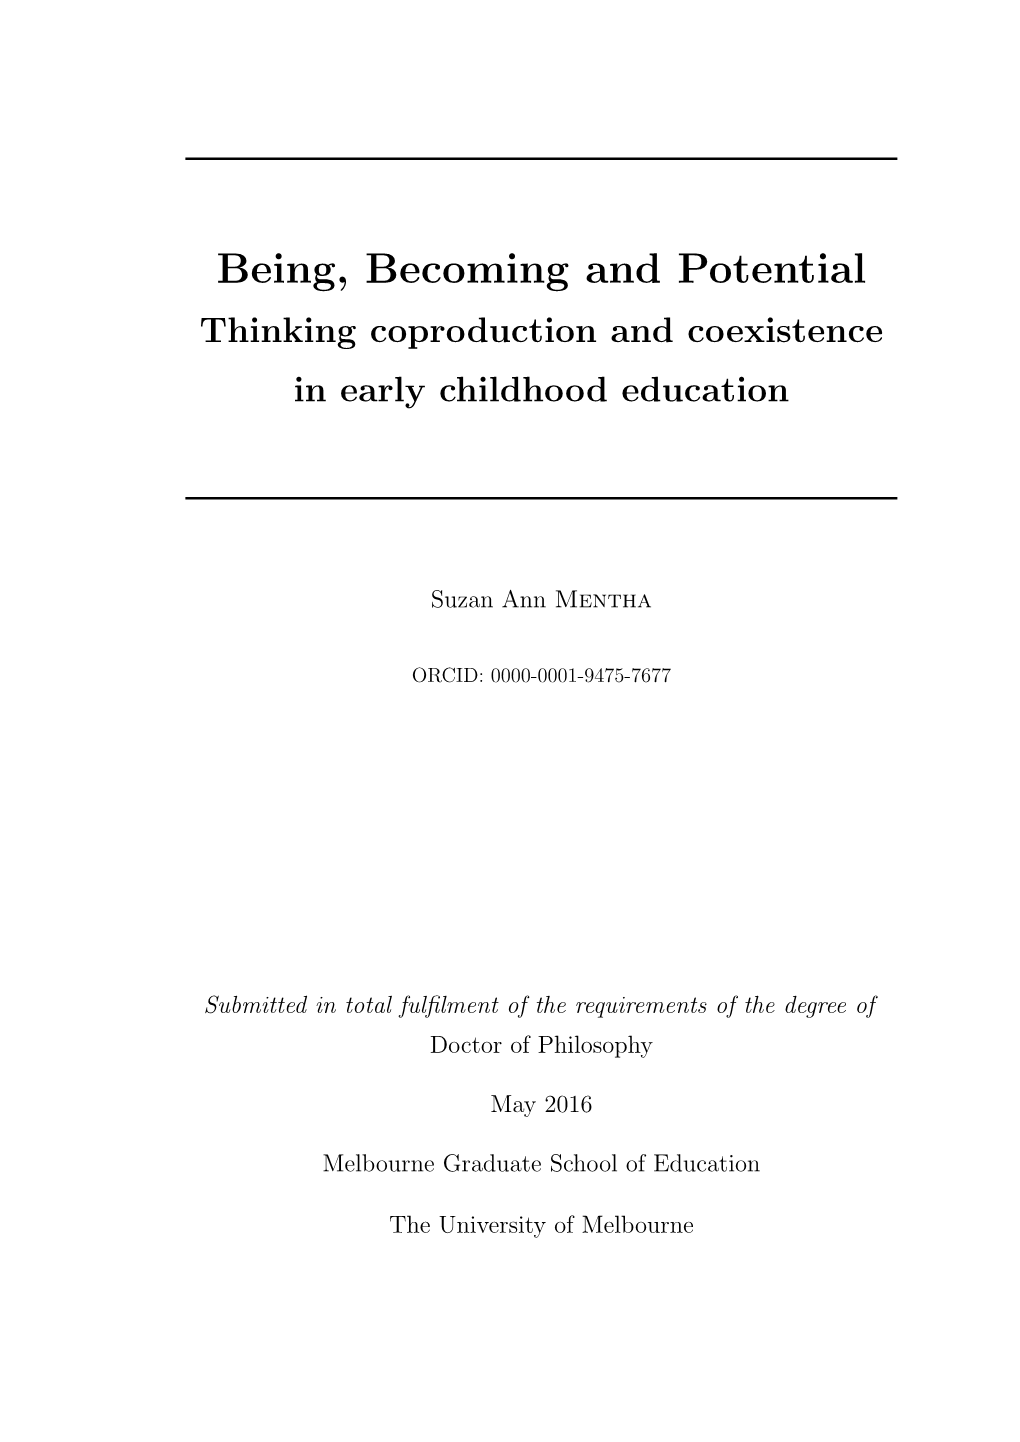 Being, Becoming and Potential: Thinking Coexistence and Coproduction in Early Childhood Education